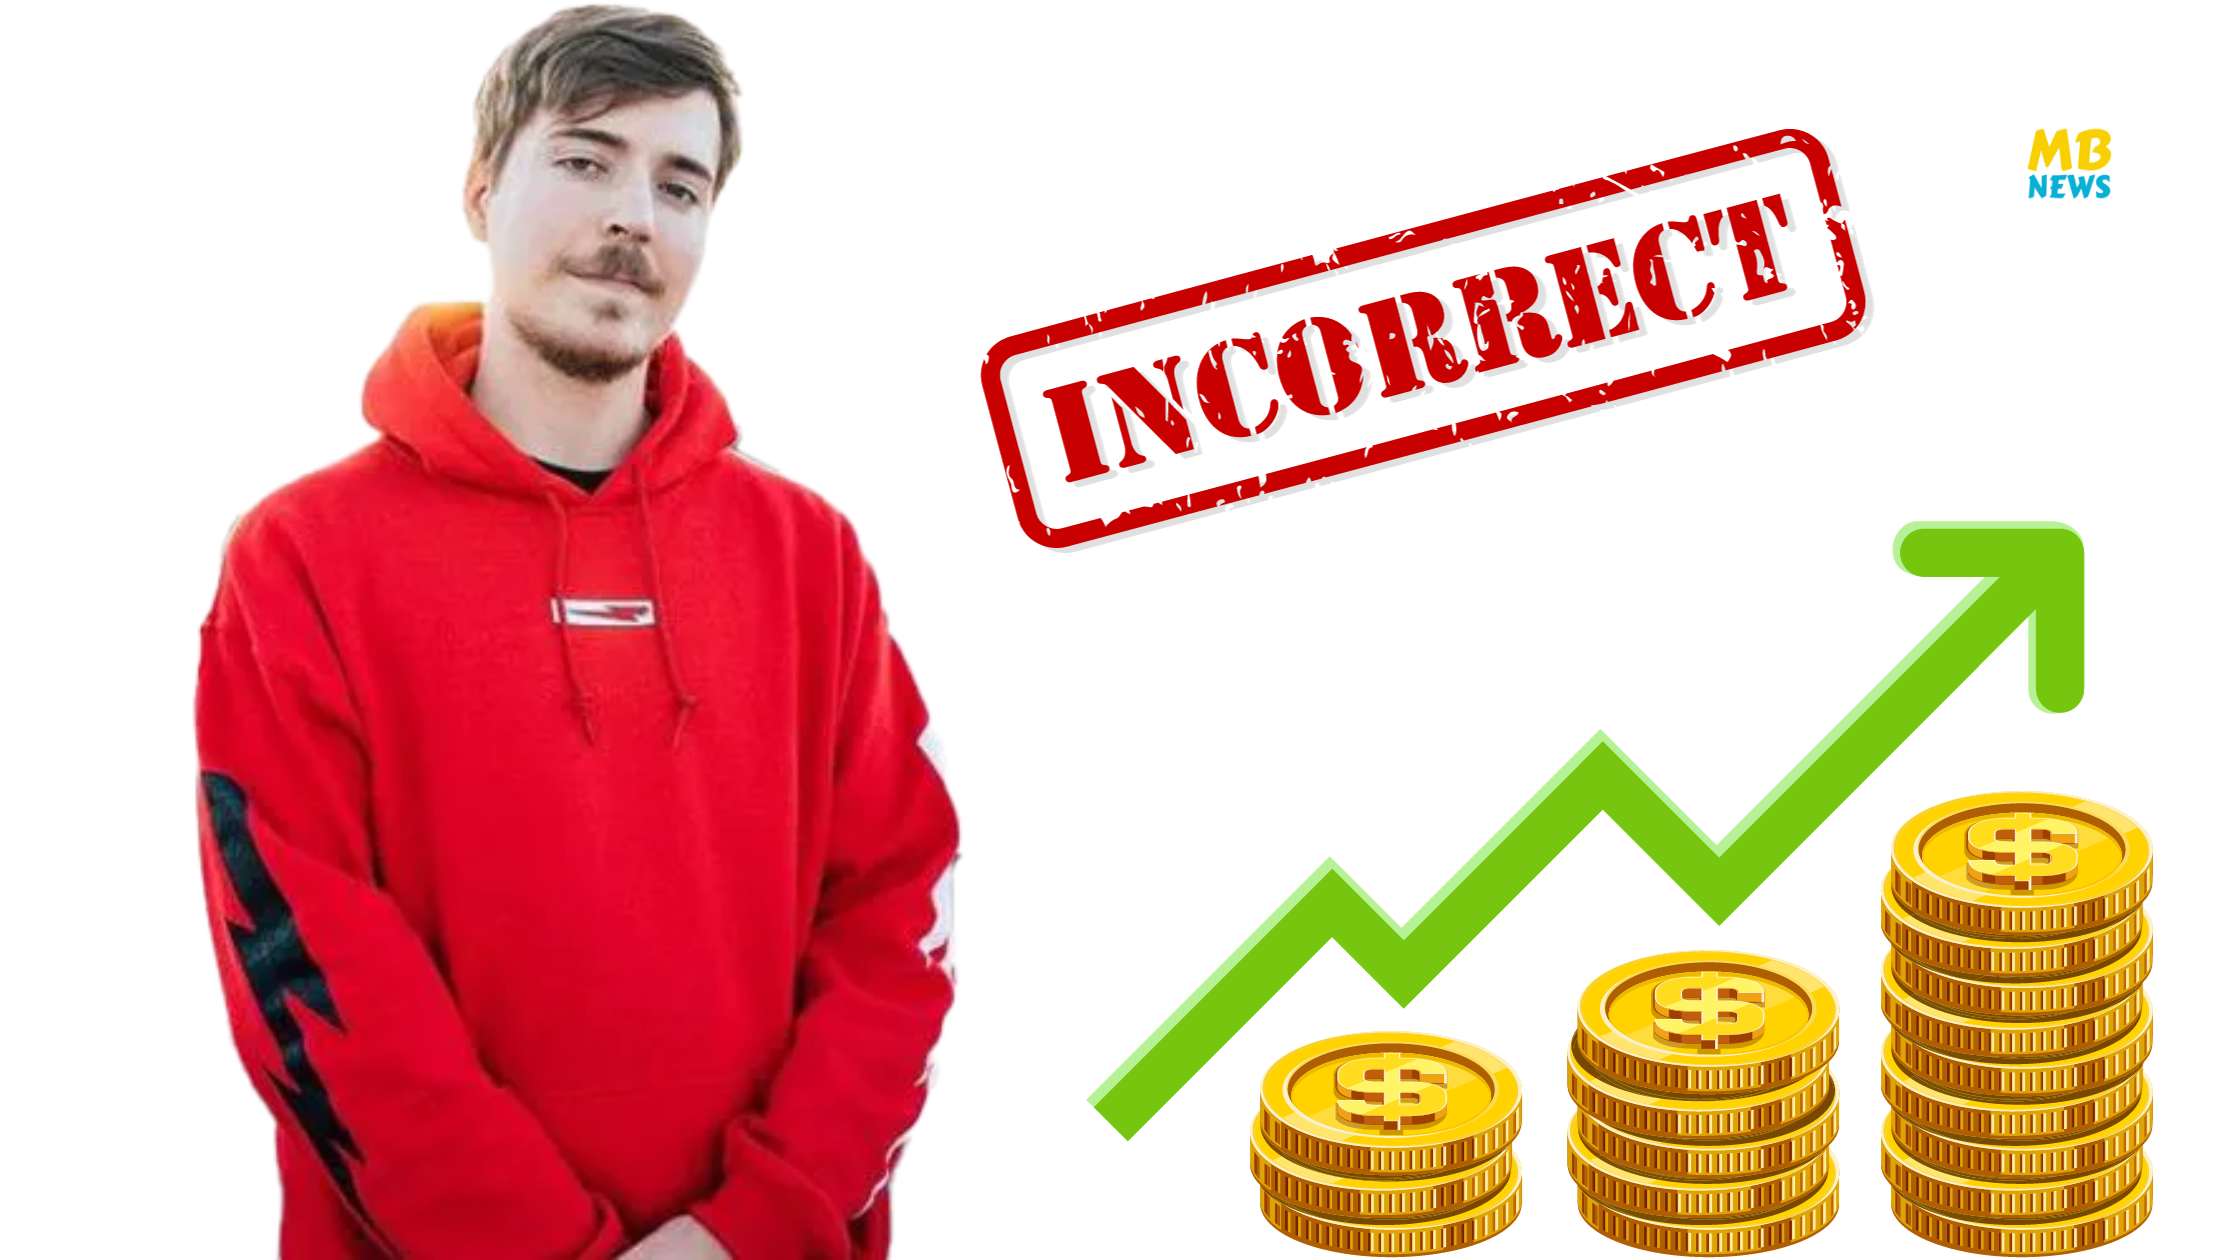 YouTuber Misleads Audience on MrBeast's Wealth Ranking & Speculative Twitter Inheritance!